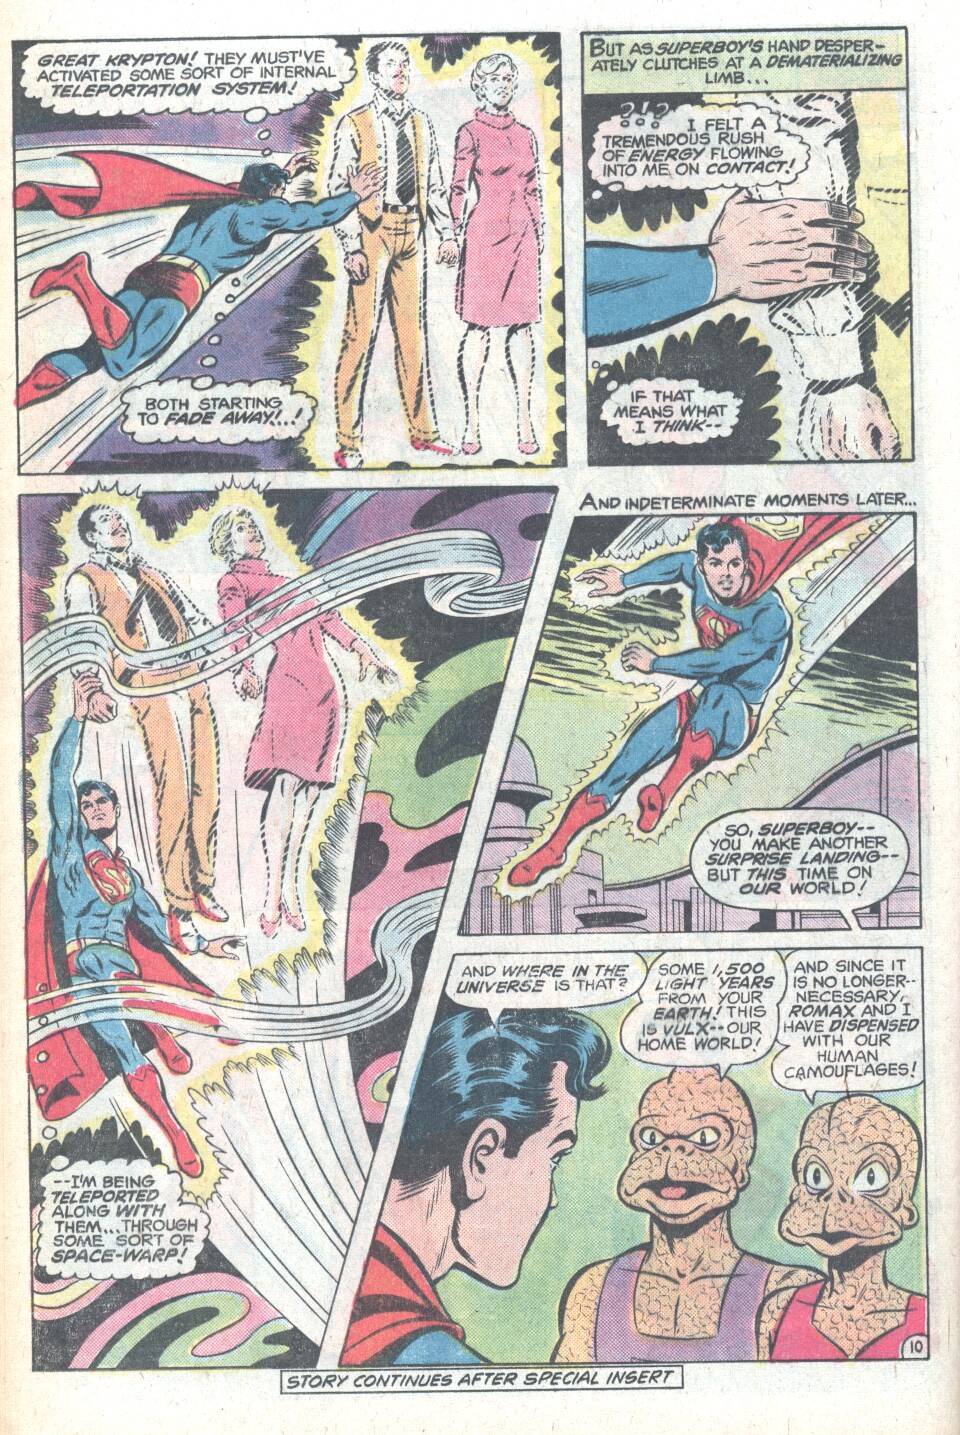 The New Adventures of Superboy 7 Page 10